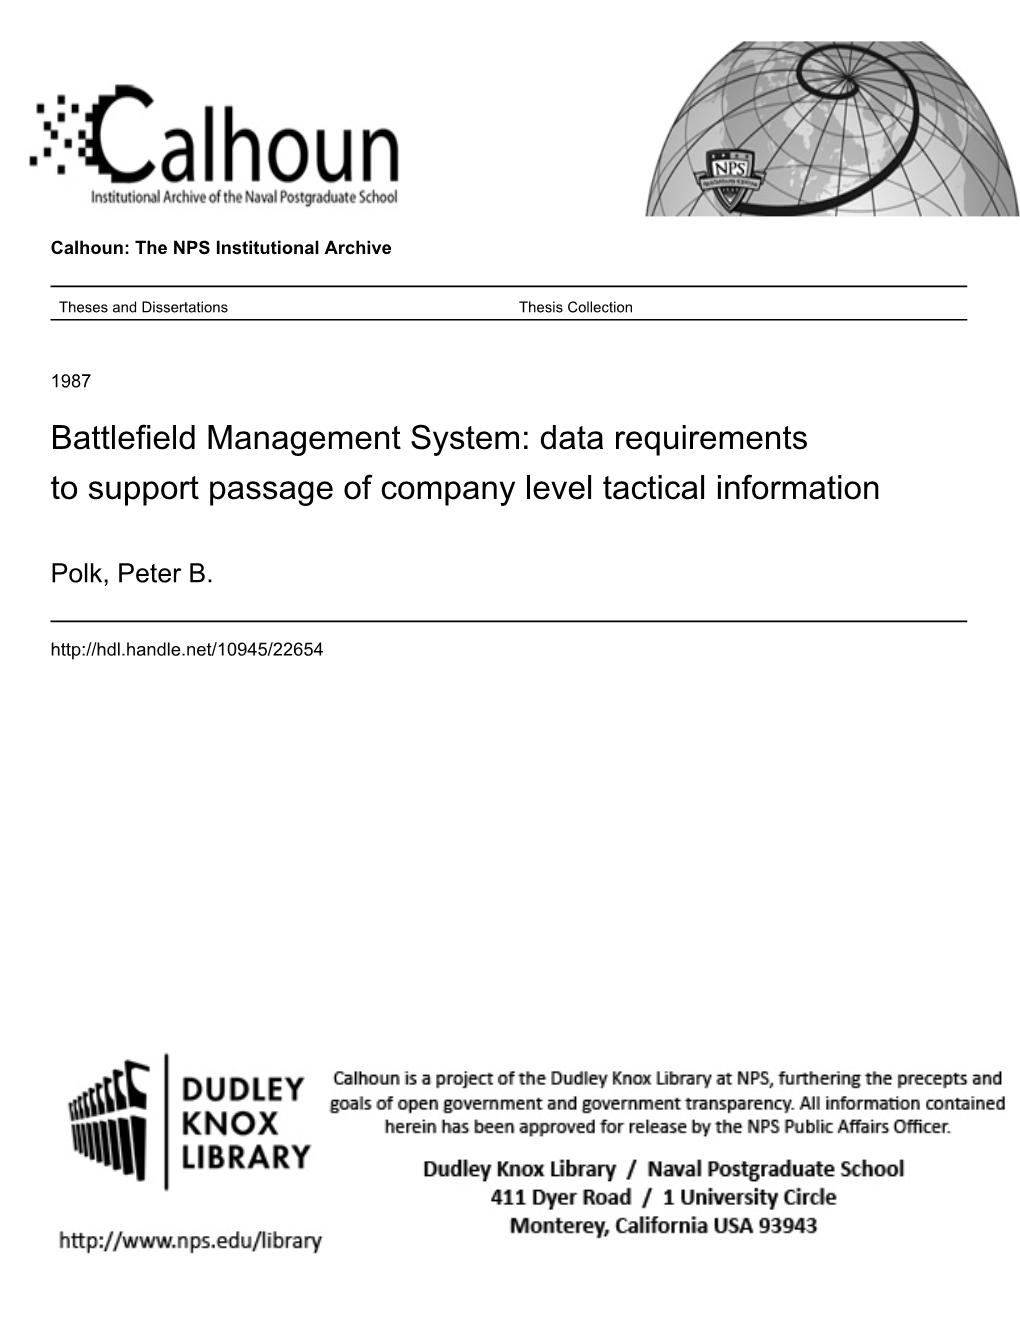 Battlefield Management System: Data Requirements to Support Passage of Company Level Tactical Information